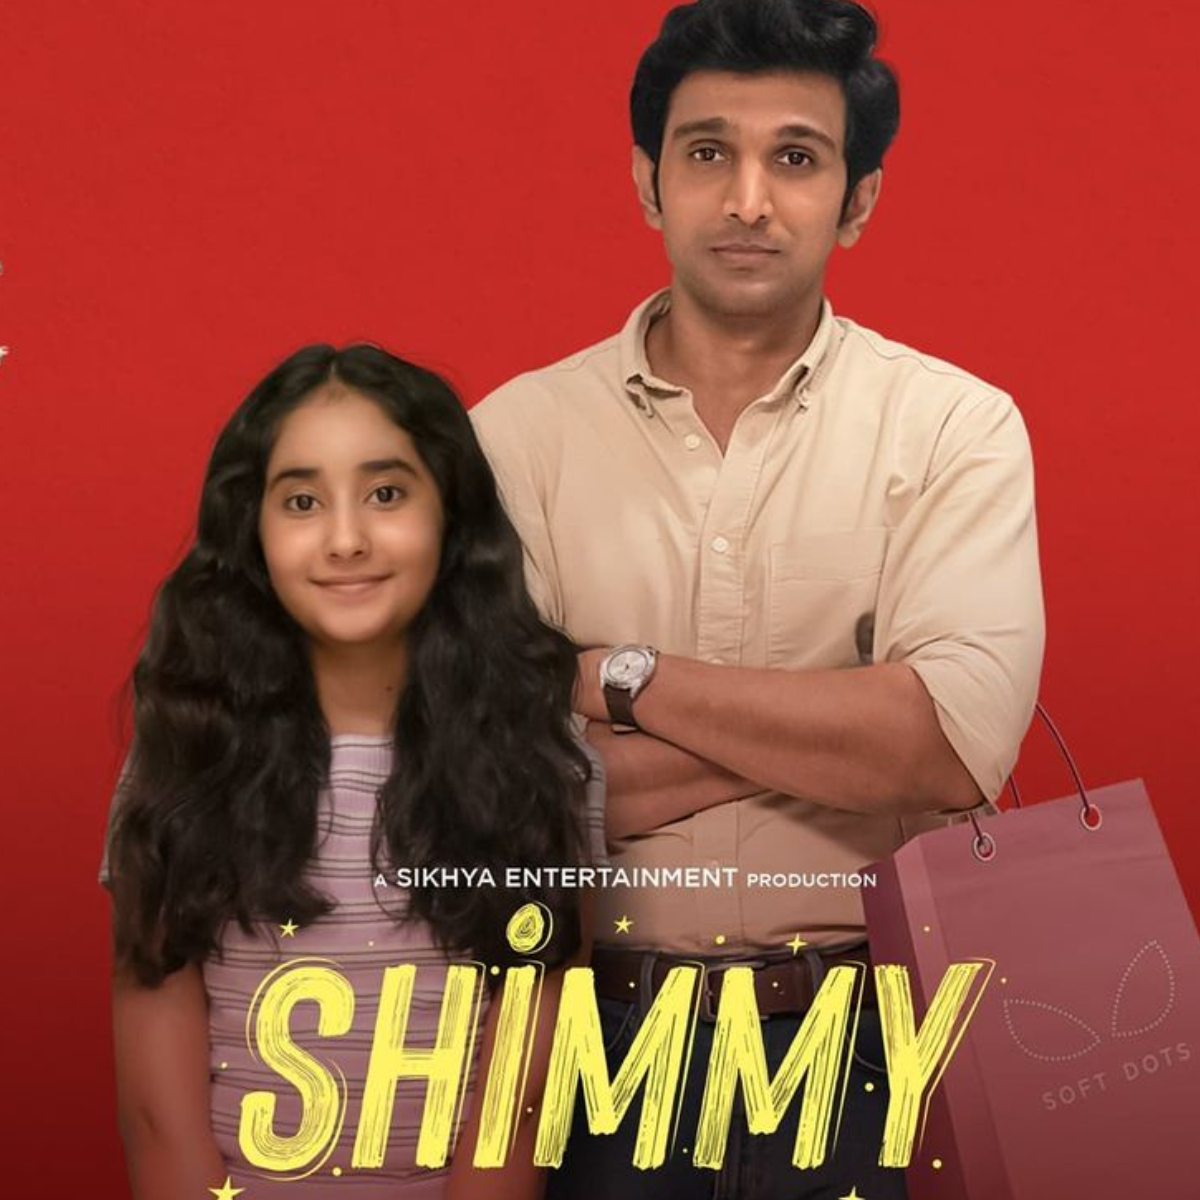 Shimmy Review: An entrancing & fiddly coming of age tale touching upon taboos ft Pratik Gandhi & Chahat Tewani